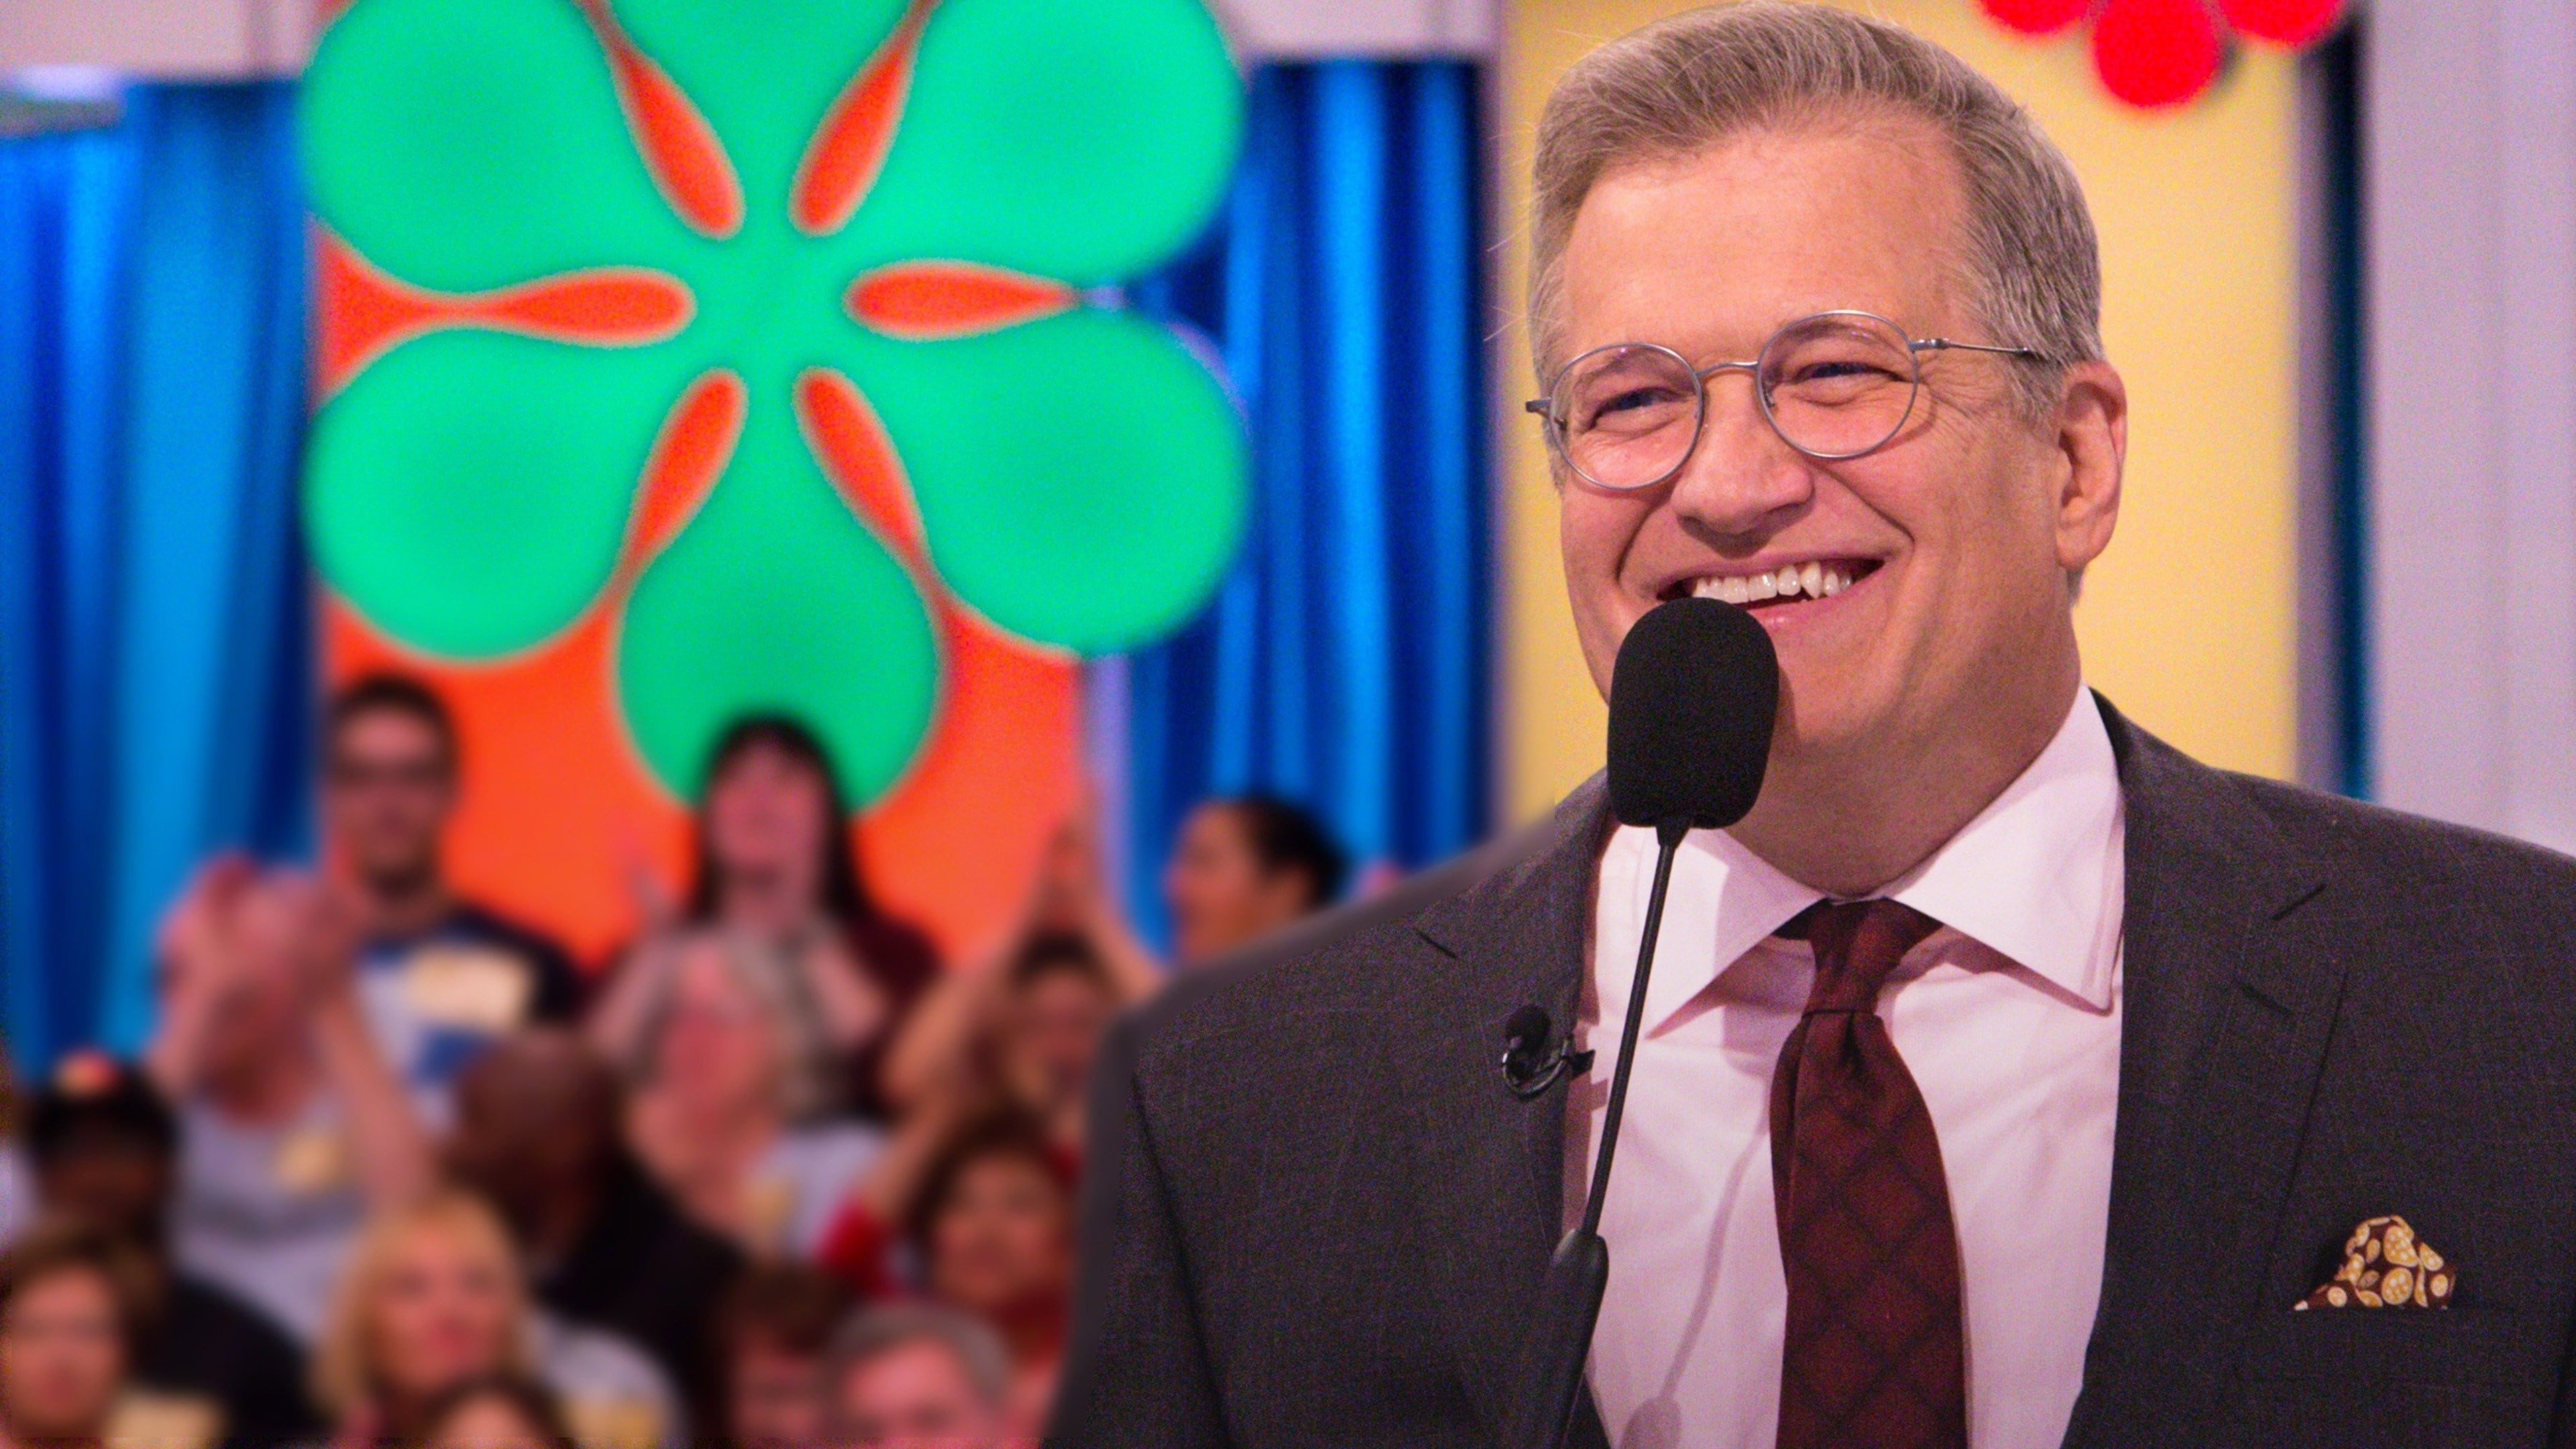 The Price Is Right - Season 1 Episode 223 : The Price Is Right Season 1 Episode 223